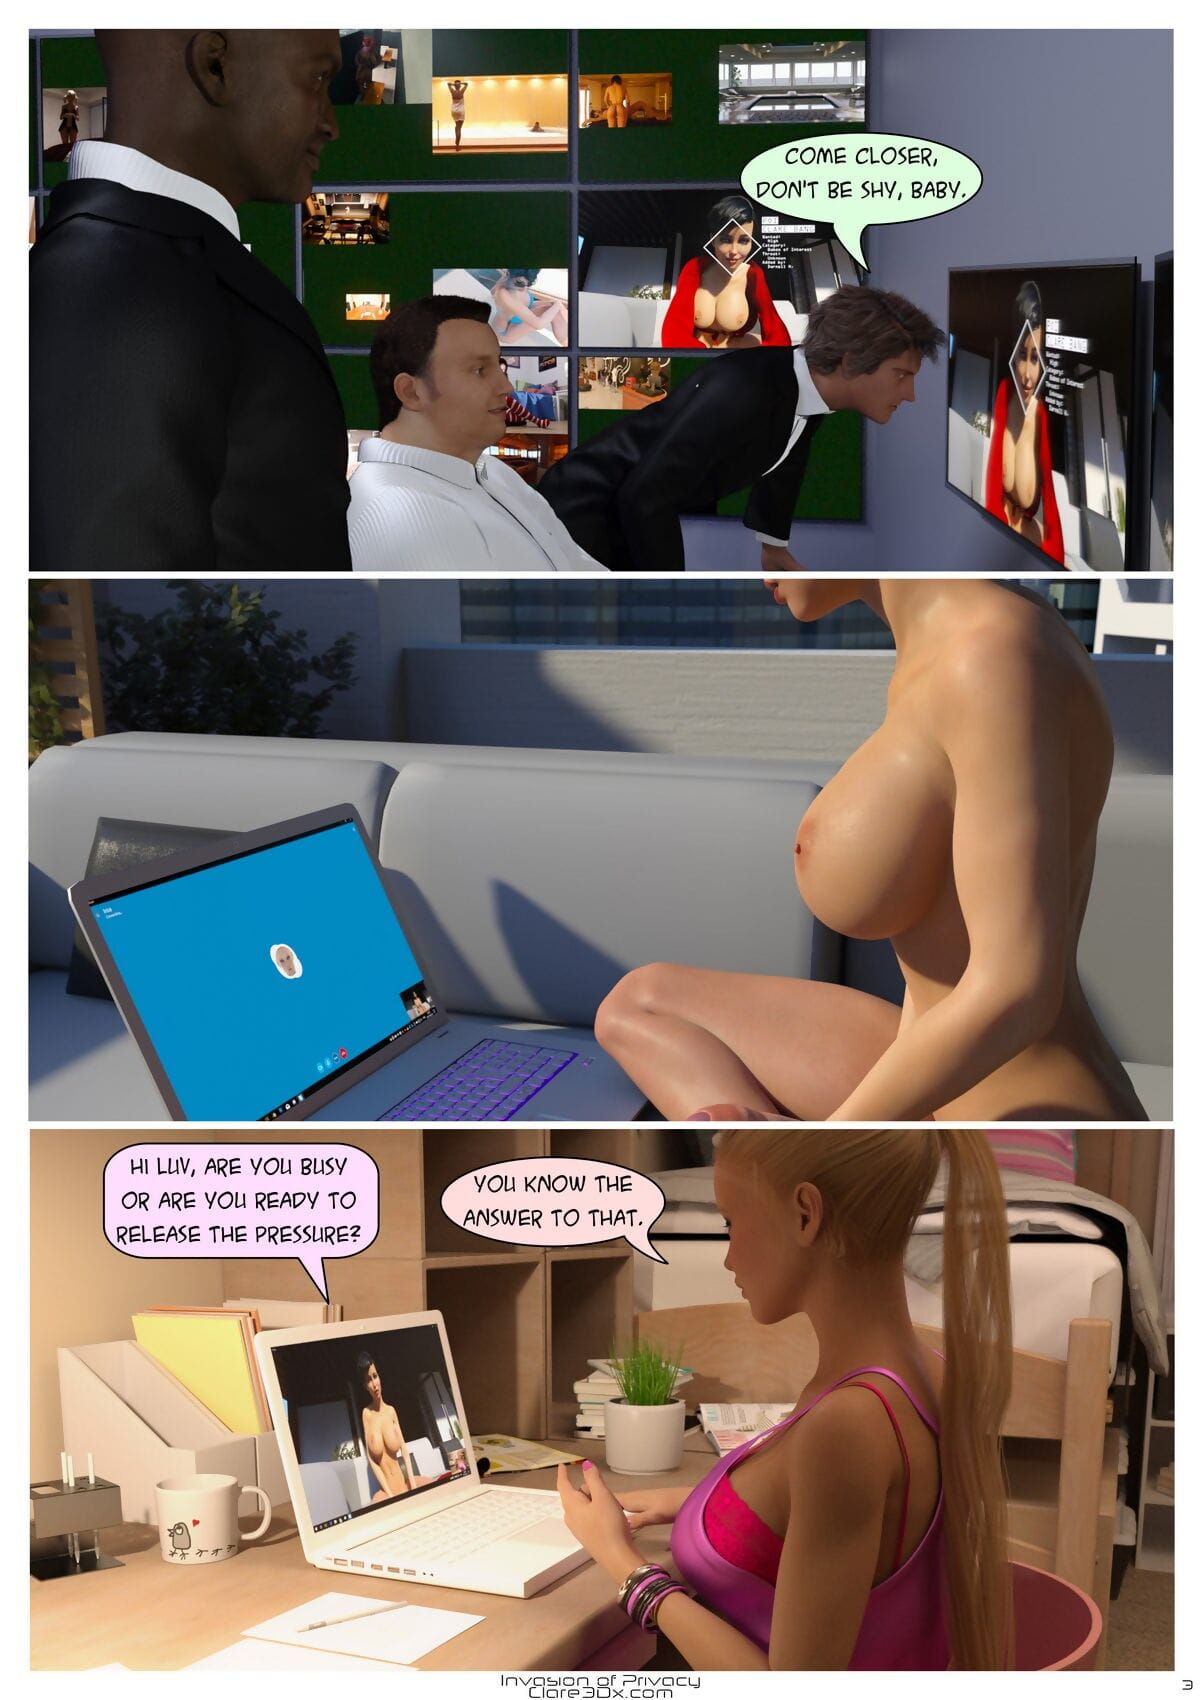 Clare3dx – Invasion Of Privacy